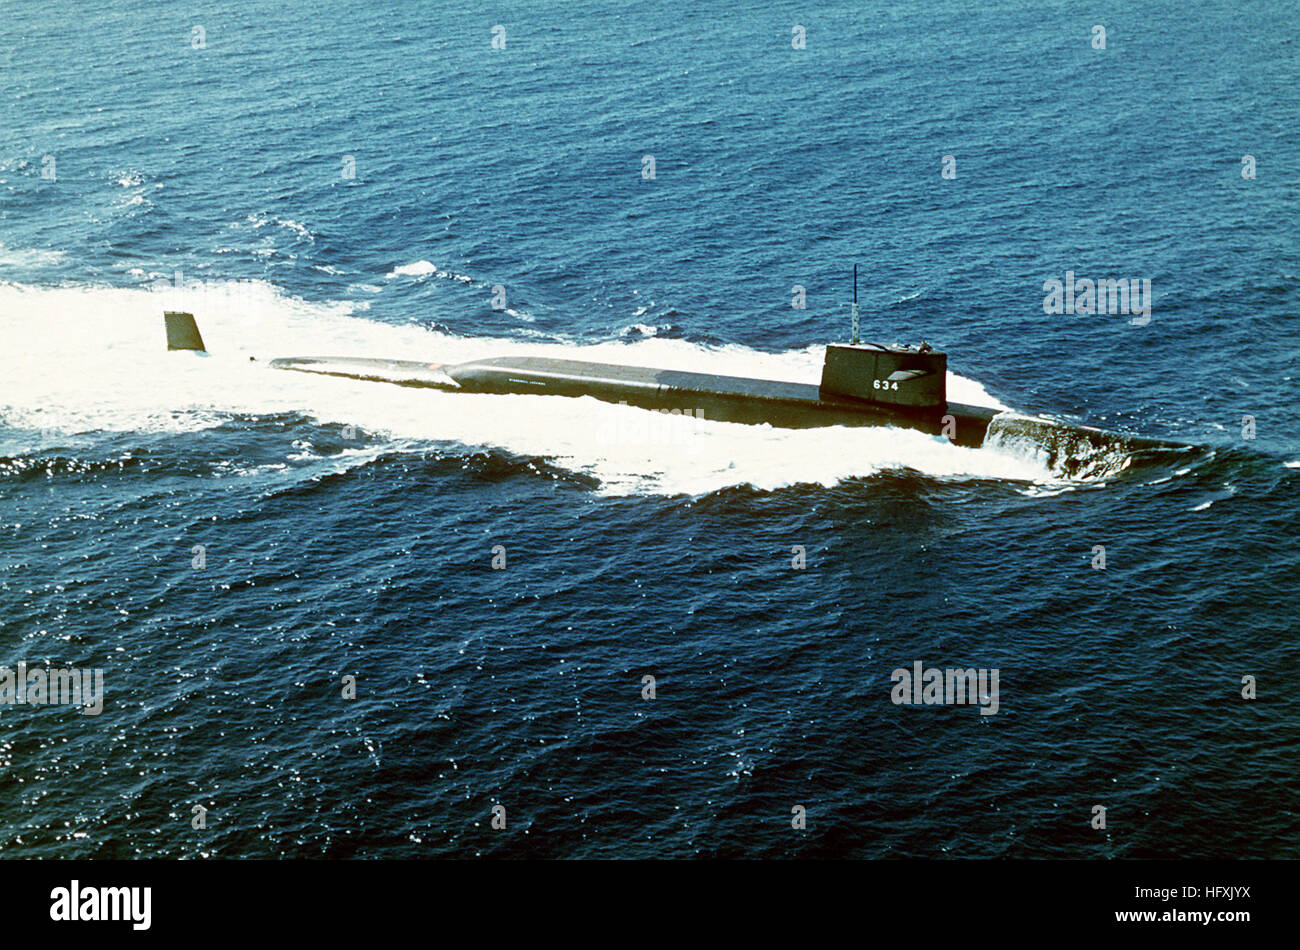 A starboard view of the nuclear-powered strategic missile submarine USS STONEWALL JACKSON (SSBN-634) underway. USS Stonewall Jackson SSBN-634 Stock Photo